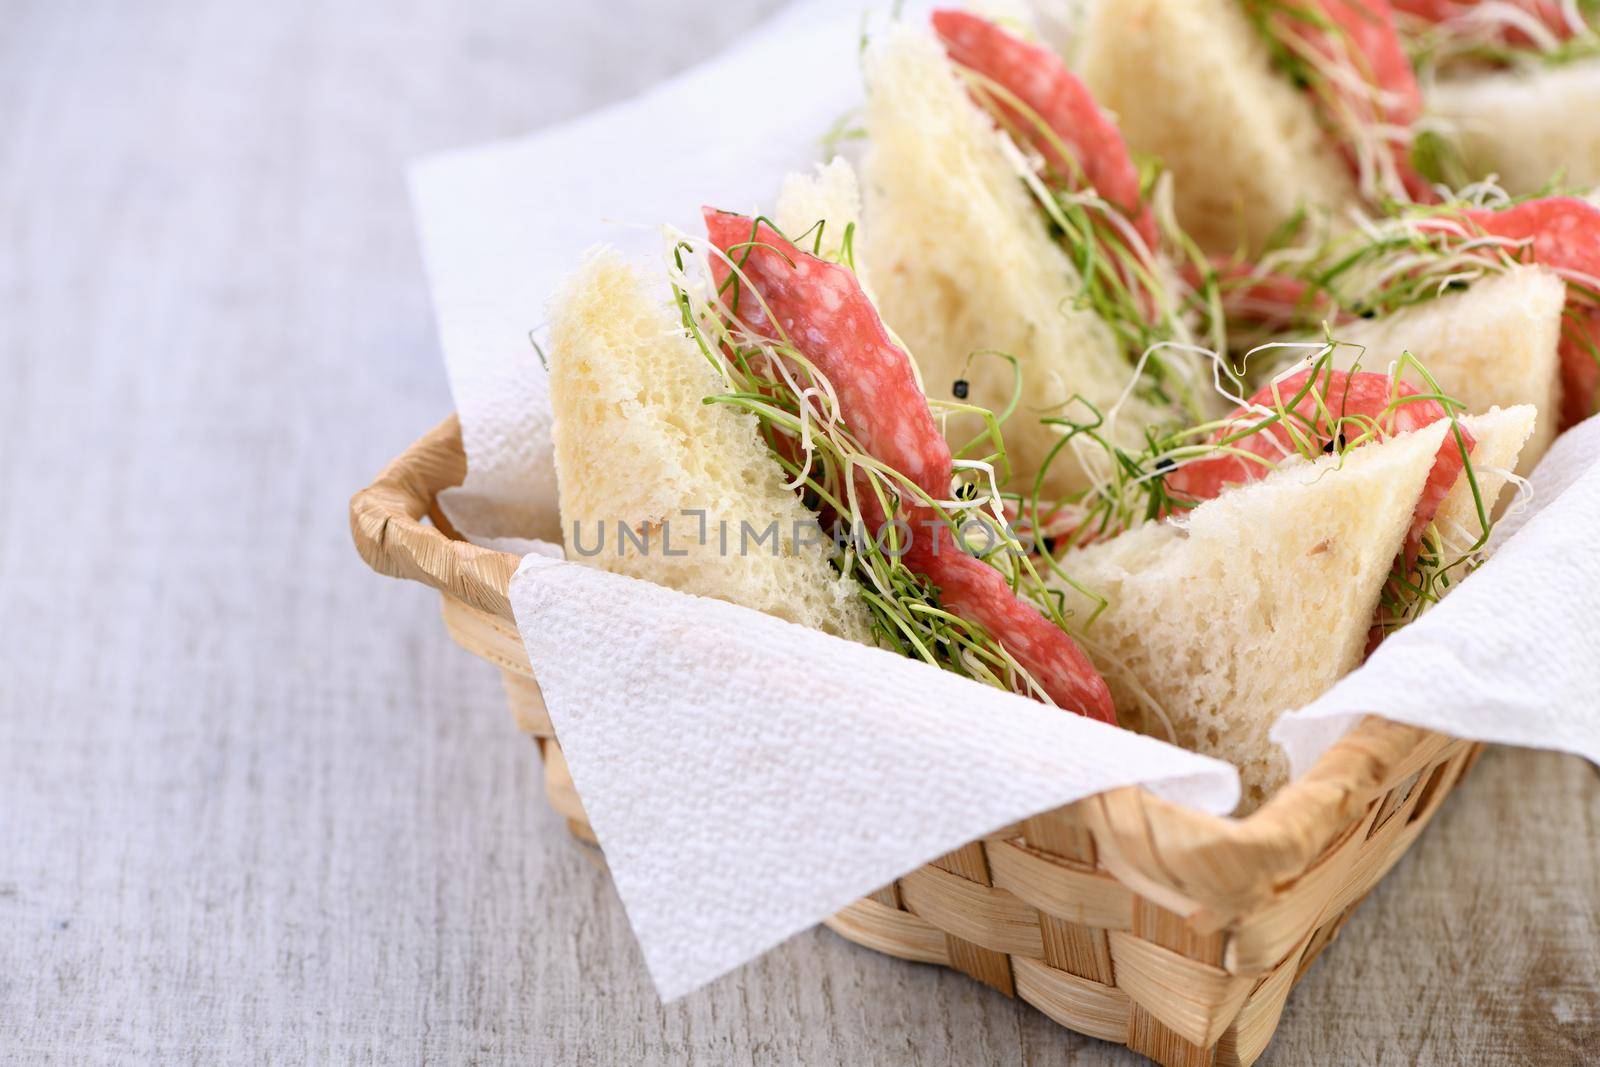 Microgreens sprouts sandwich-healthy food by Apolonia